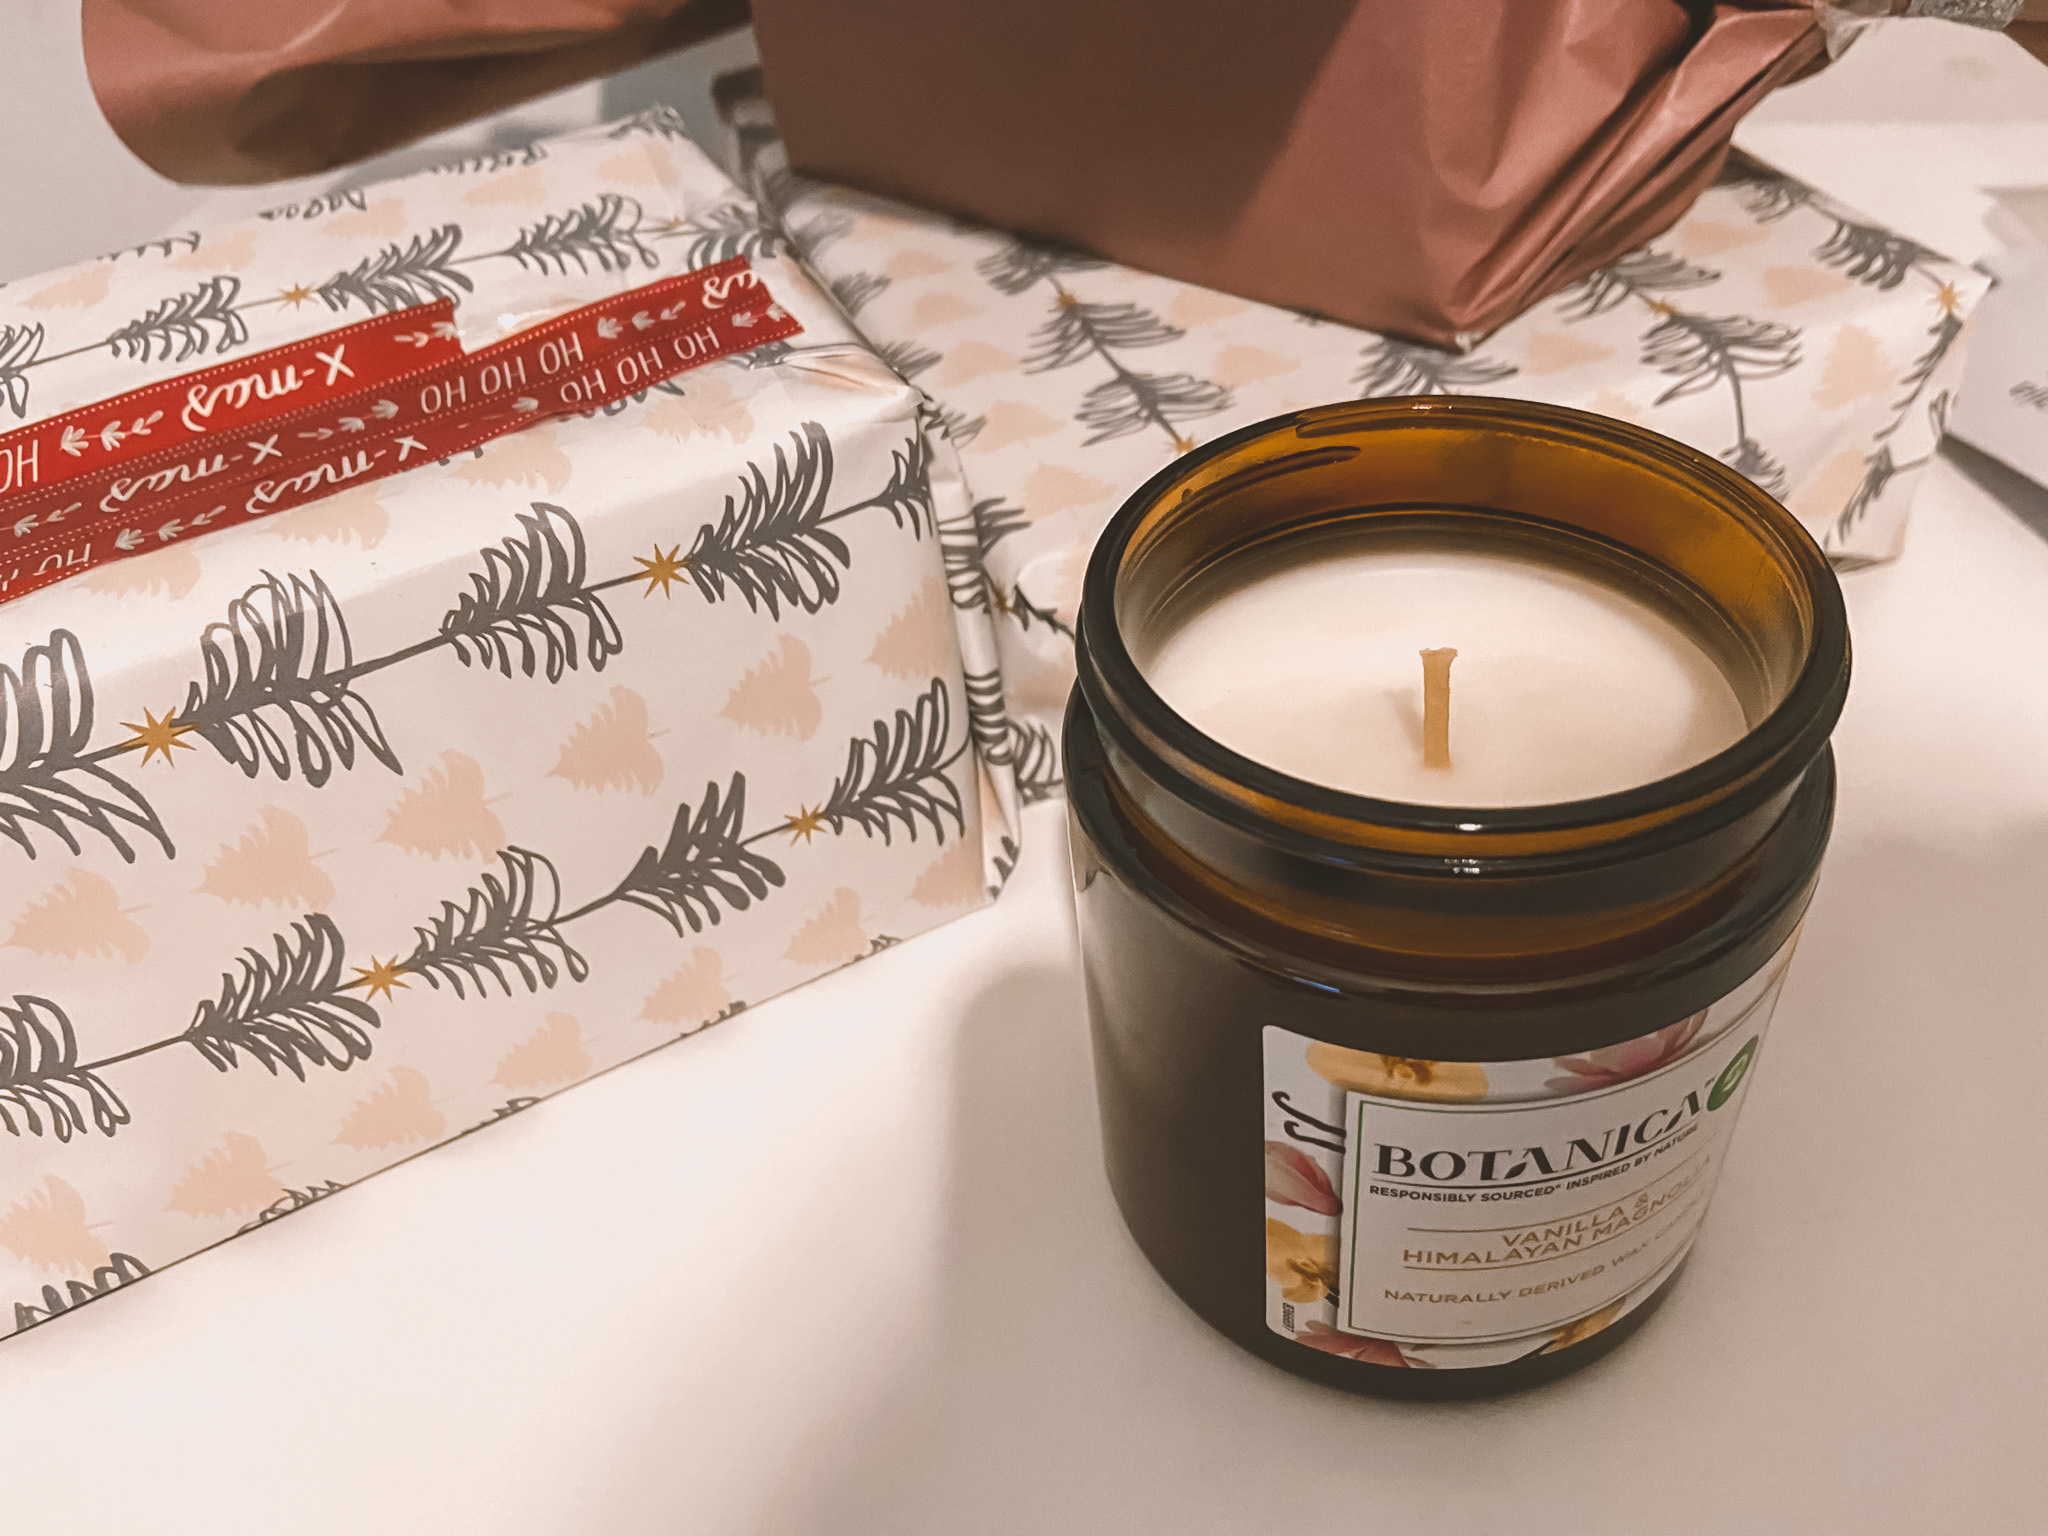 Aromatherapy candles for stress relief - Cult Beauty